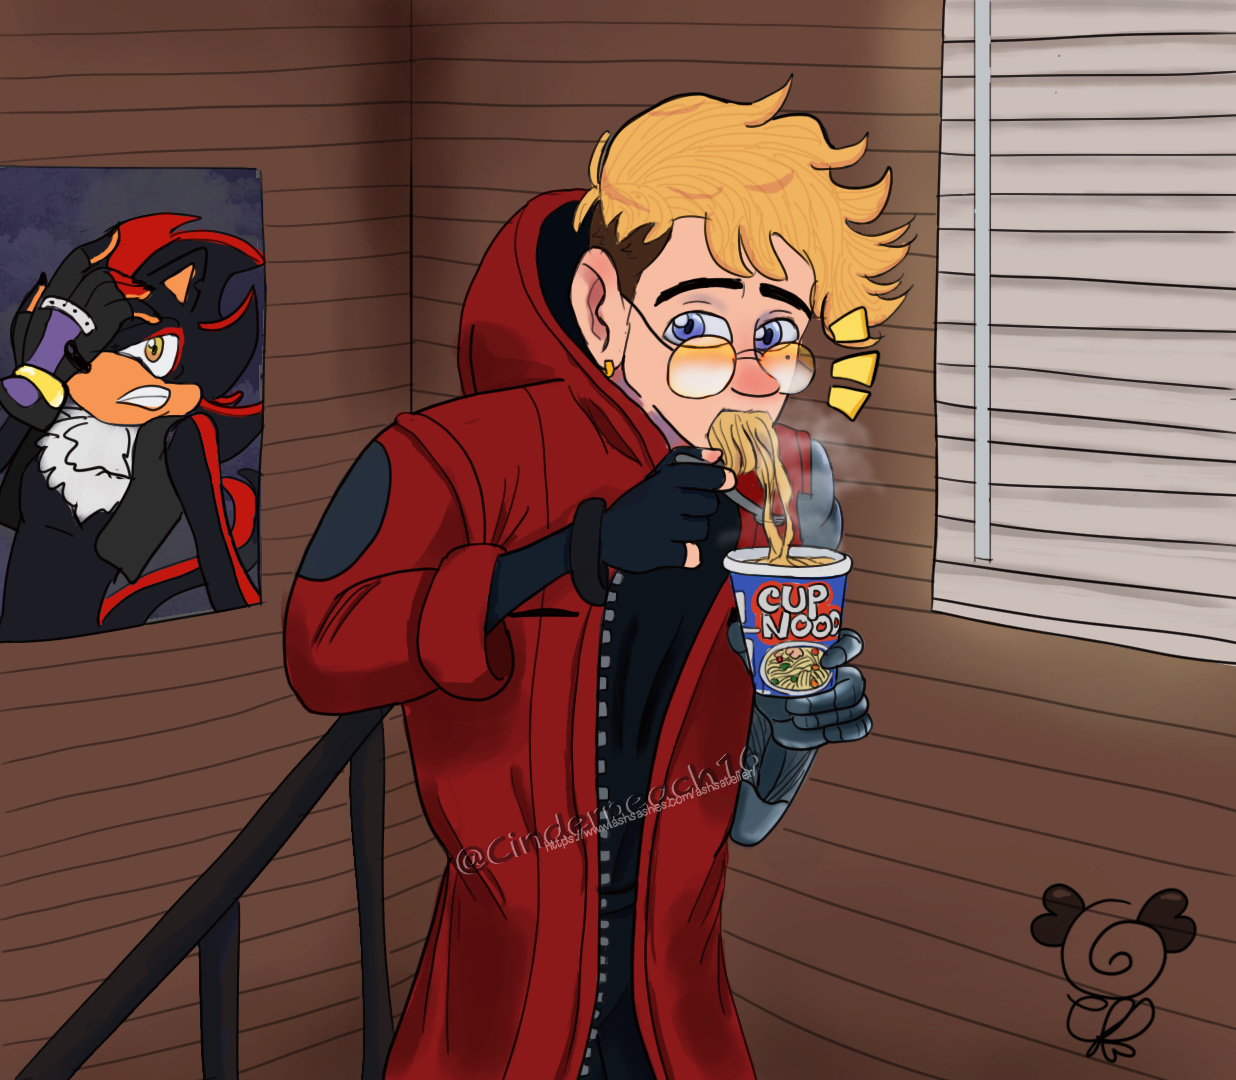 Vash eating ramen noodles, while someone off screen calls him to do something! Headcanon: Vash is a Shadow Fanboy,lol